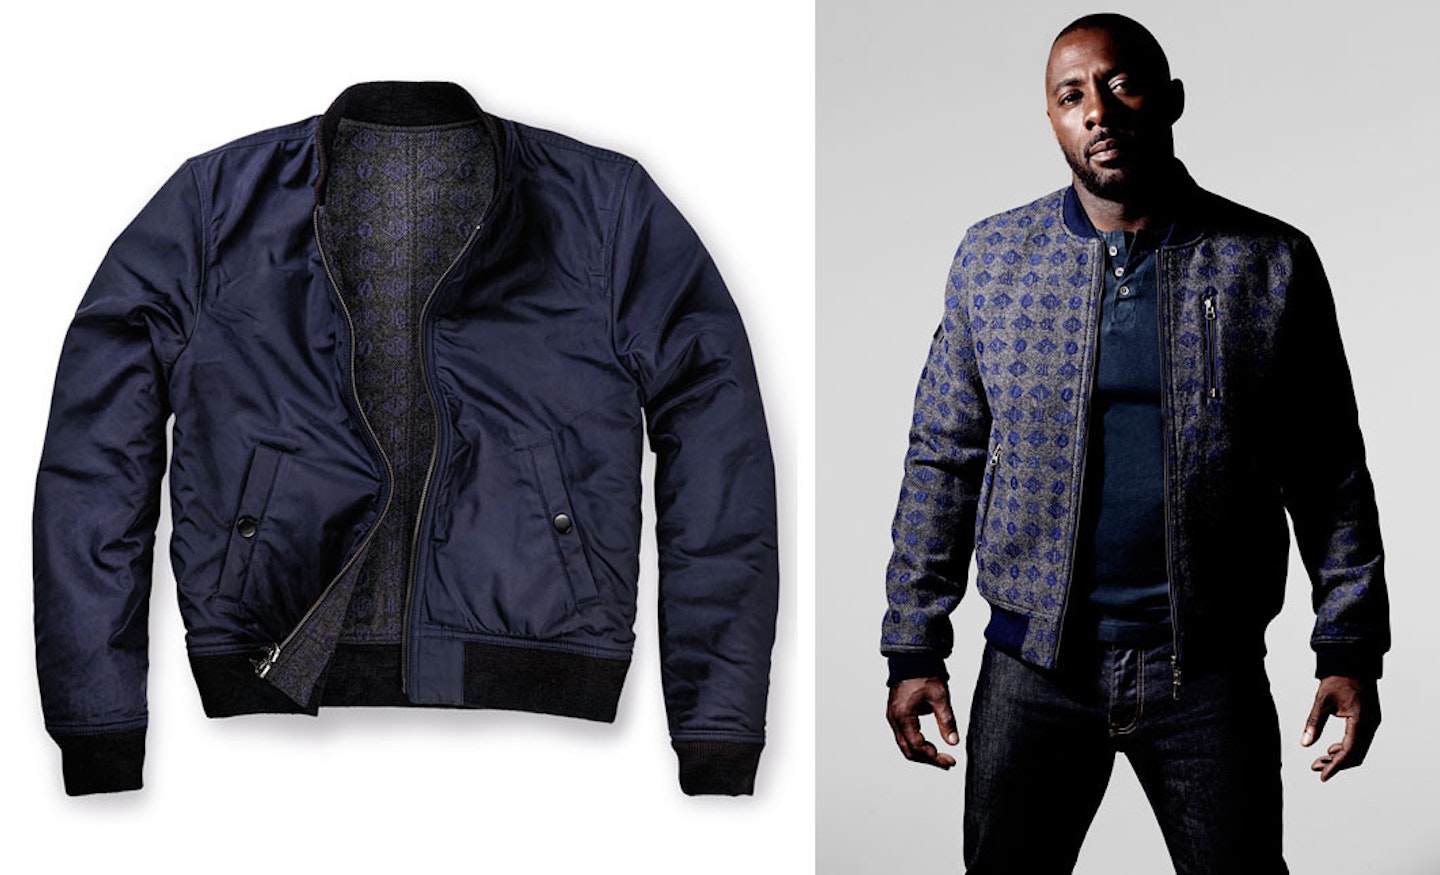 Ladies stuck for inspo for your man's gift this Christmas? Mr Elba recommends this reversable bomber jacket!